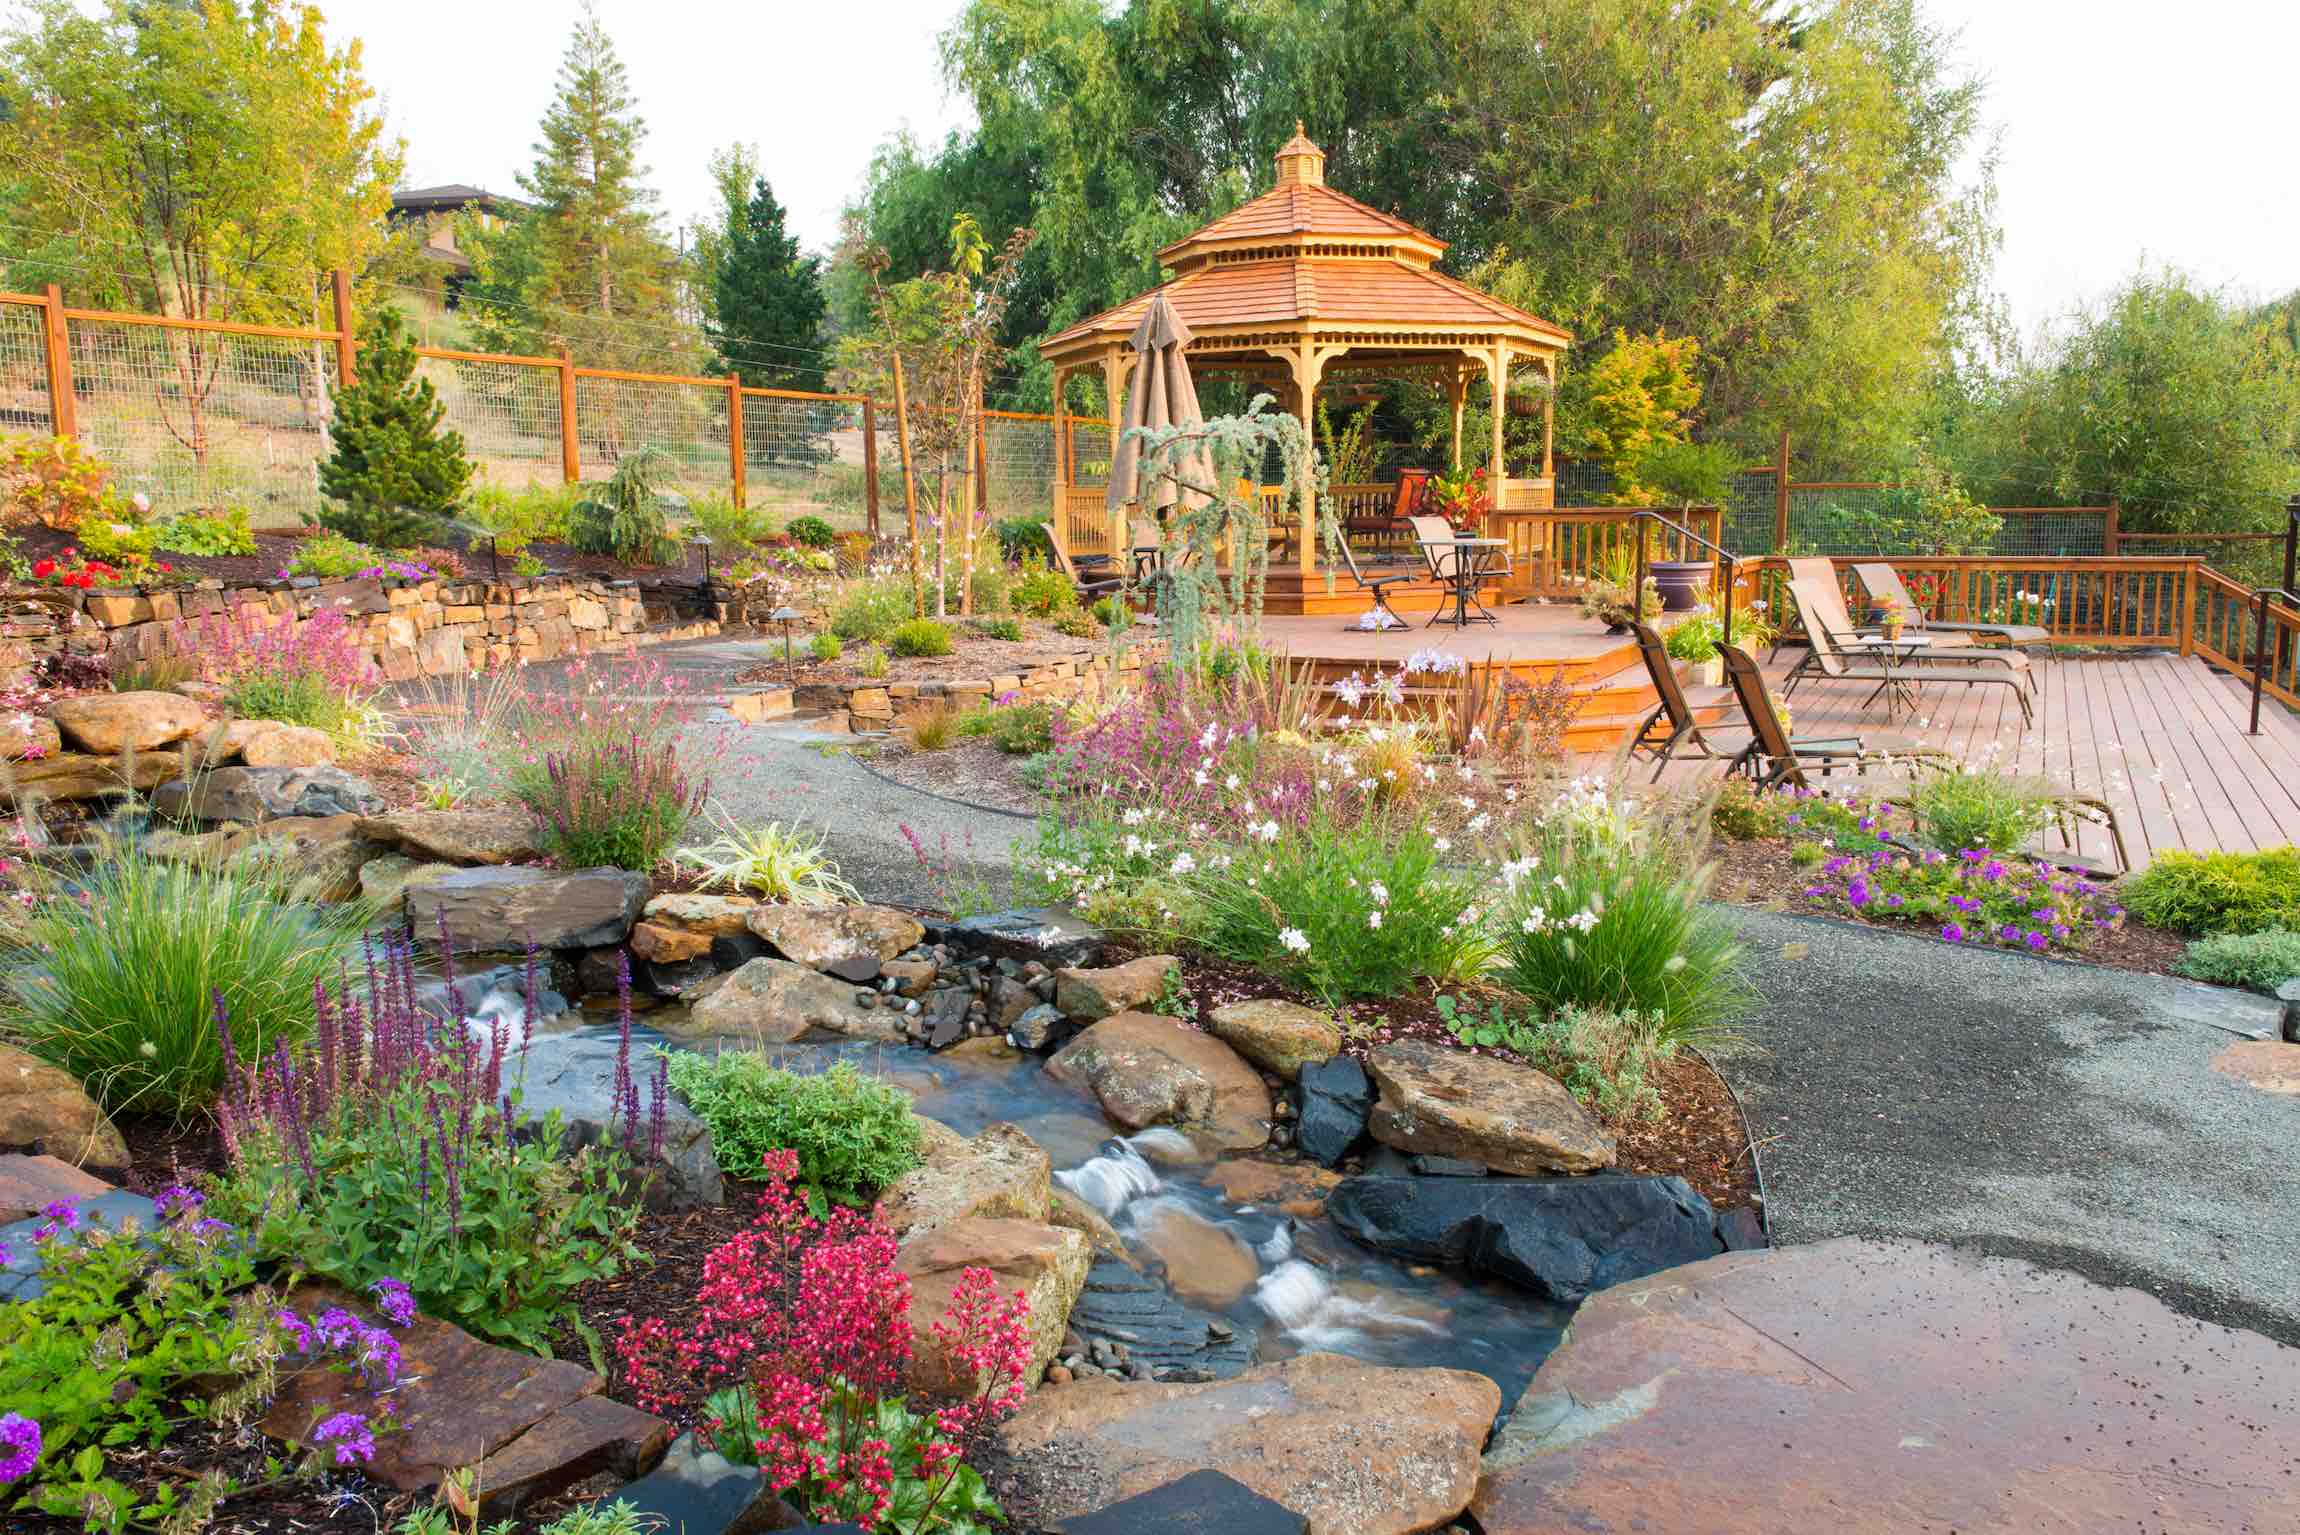 The garden paths at Country Willows Inn & Estate in Ashland, Oregon meander past the koi ponds and brook, and lead to the gazebo and pool deck with umbrellas and reclining chaise loungers.